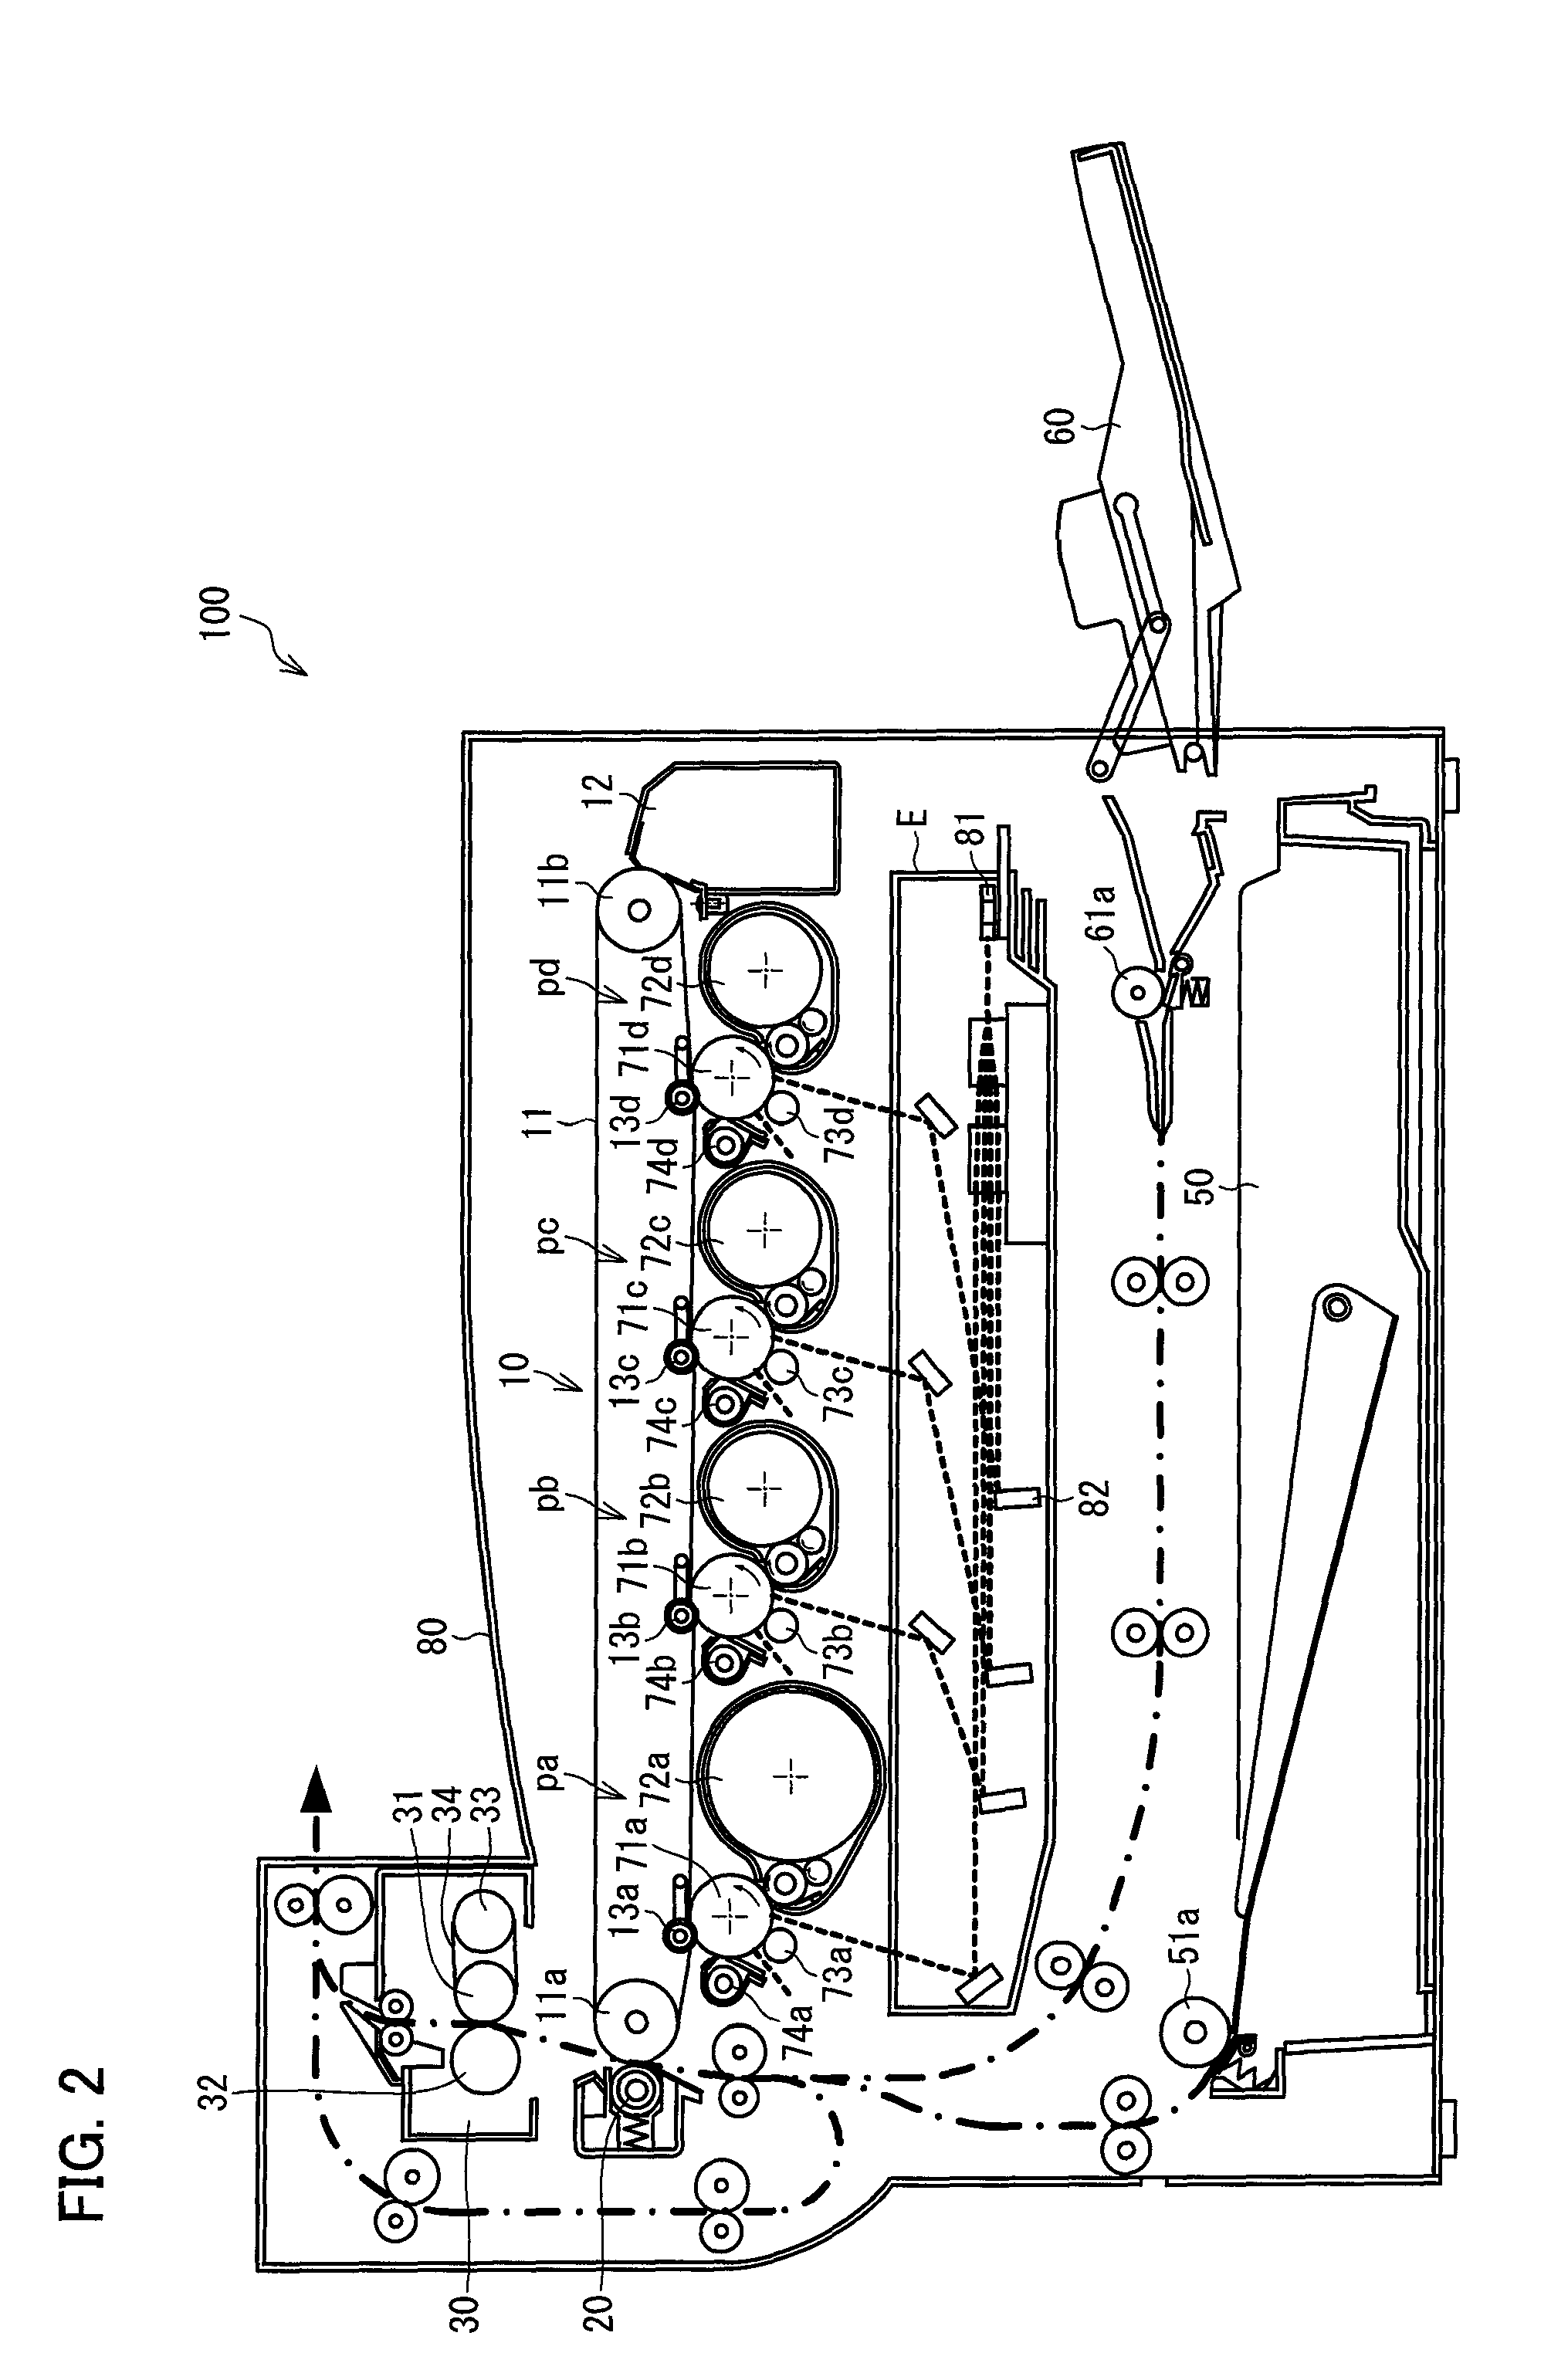 Fixing device having an endless fixing belt and two-position disjunction mechanism